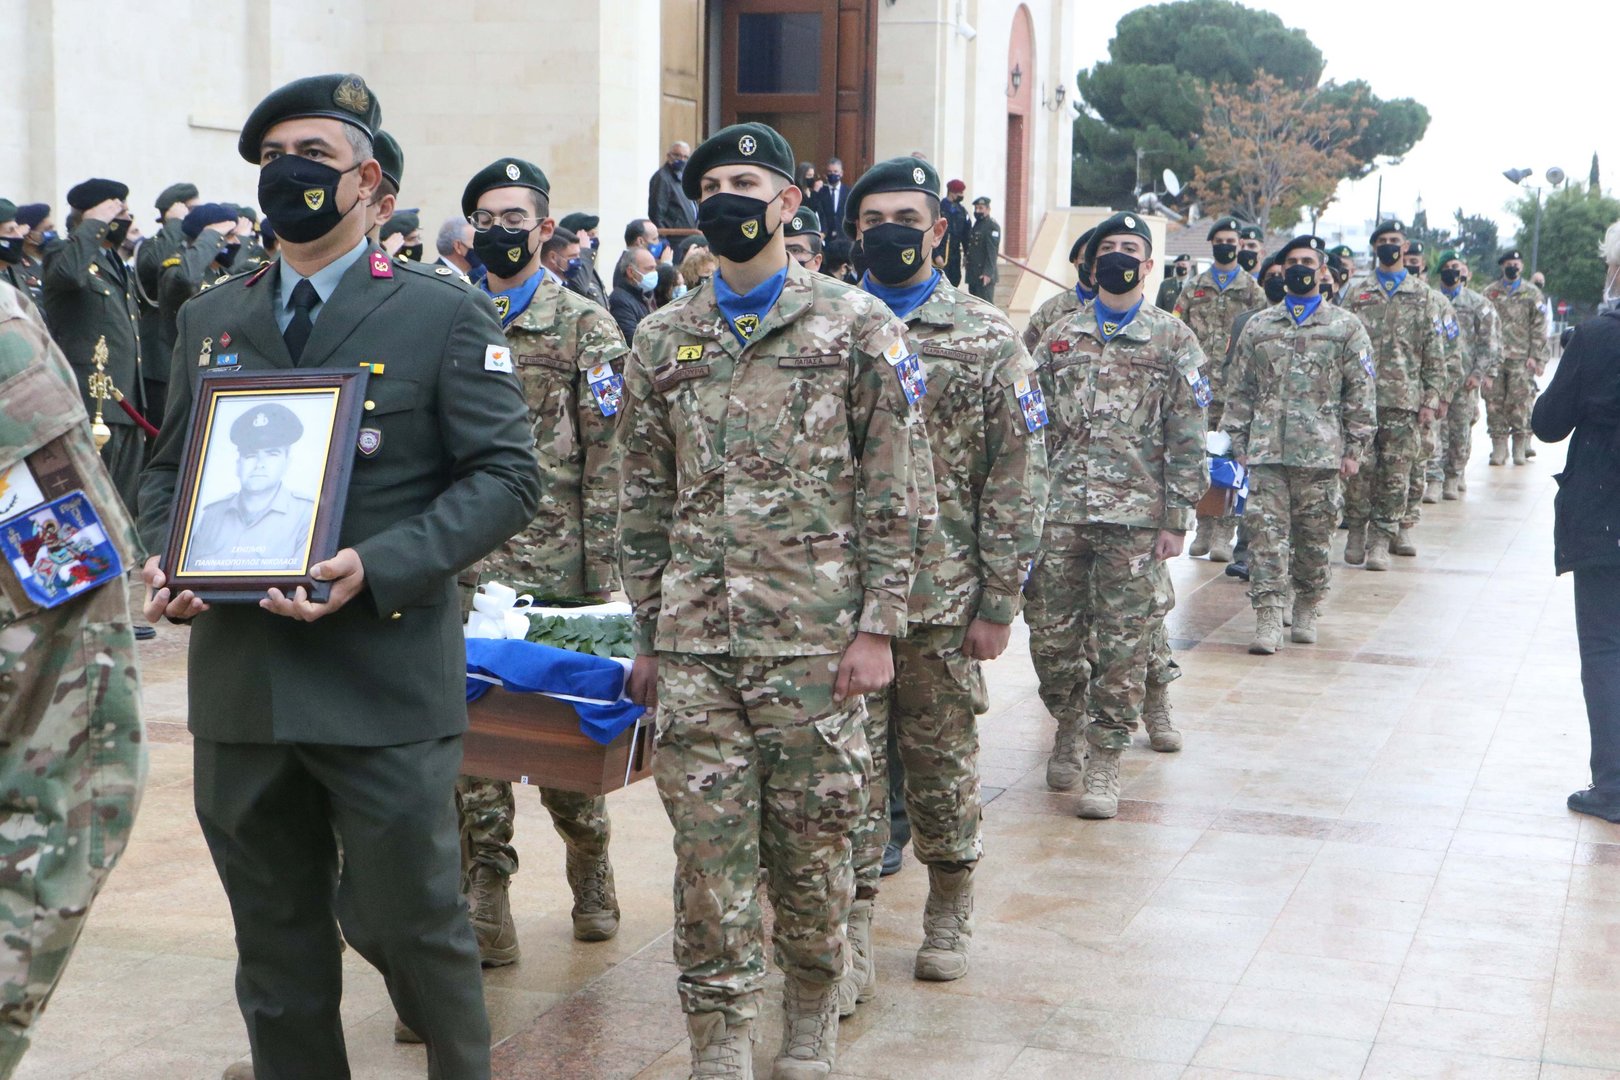 image Remains of Greek soldiers travel back home